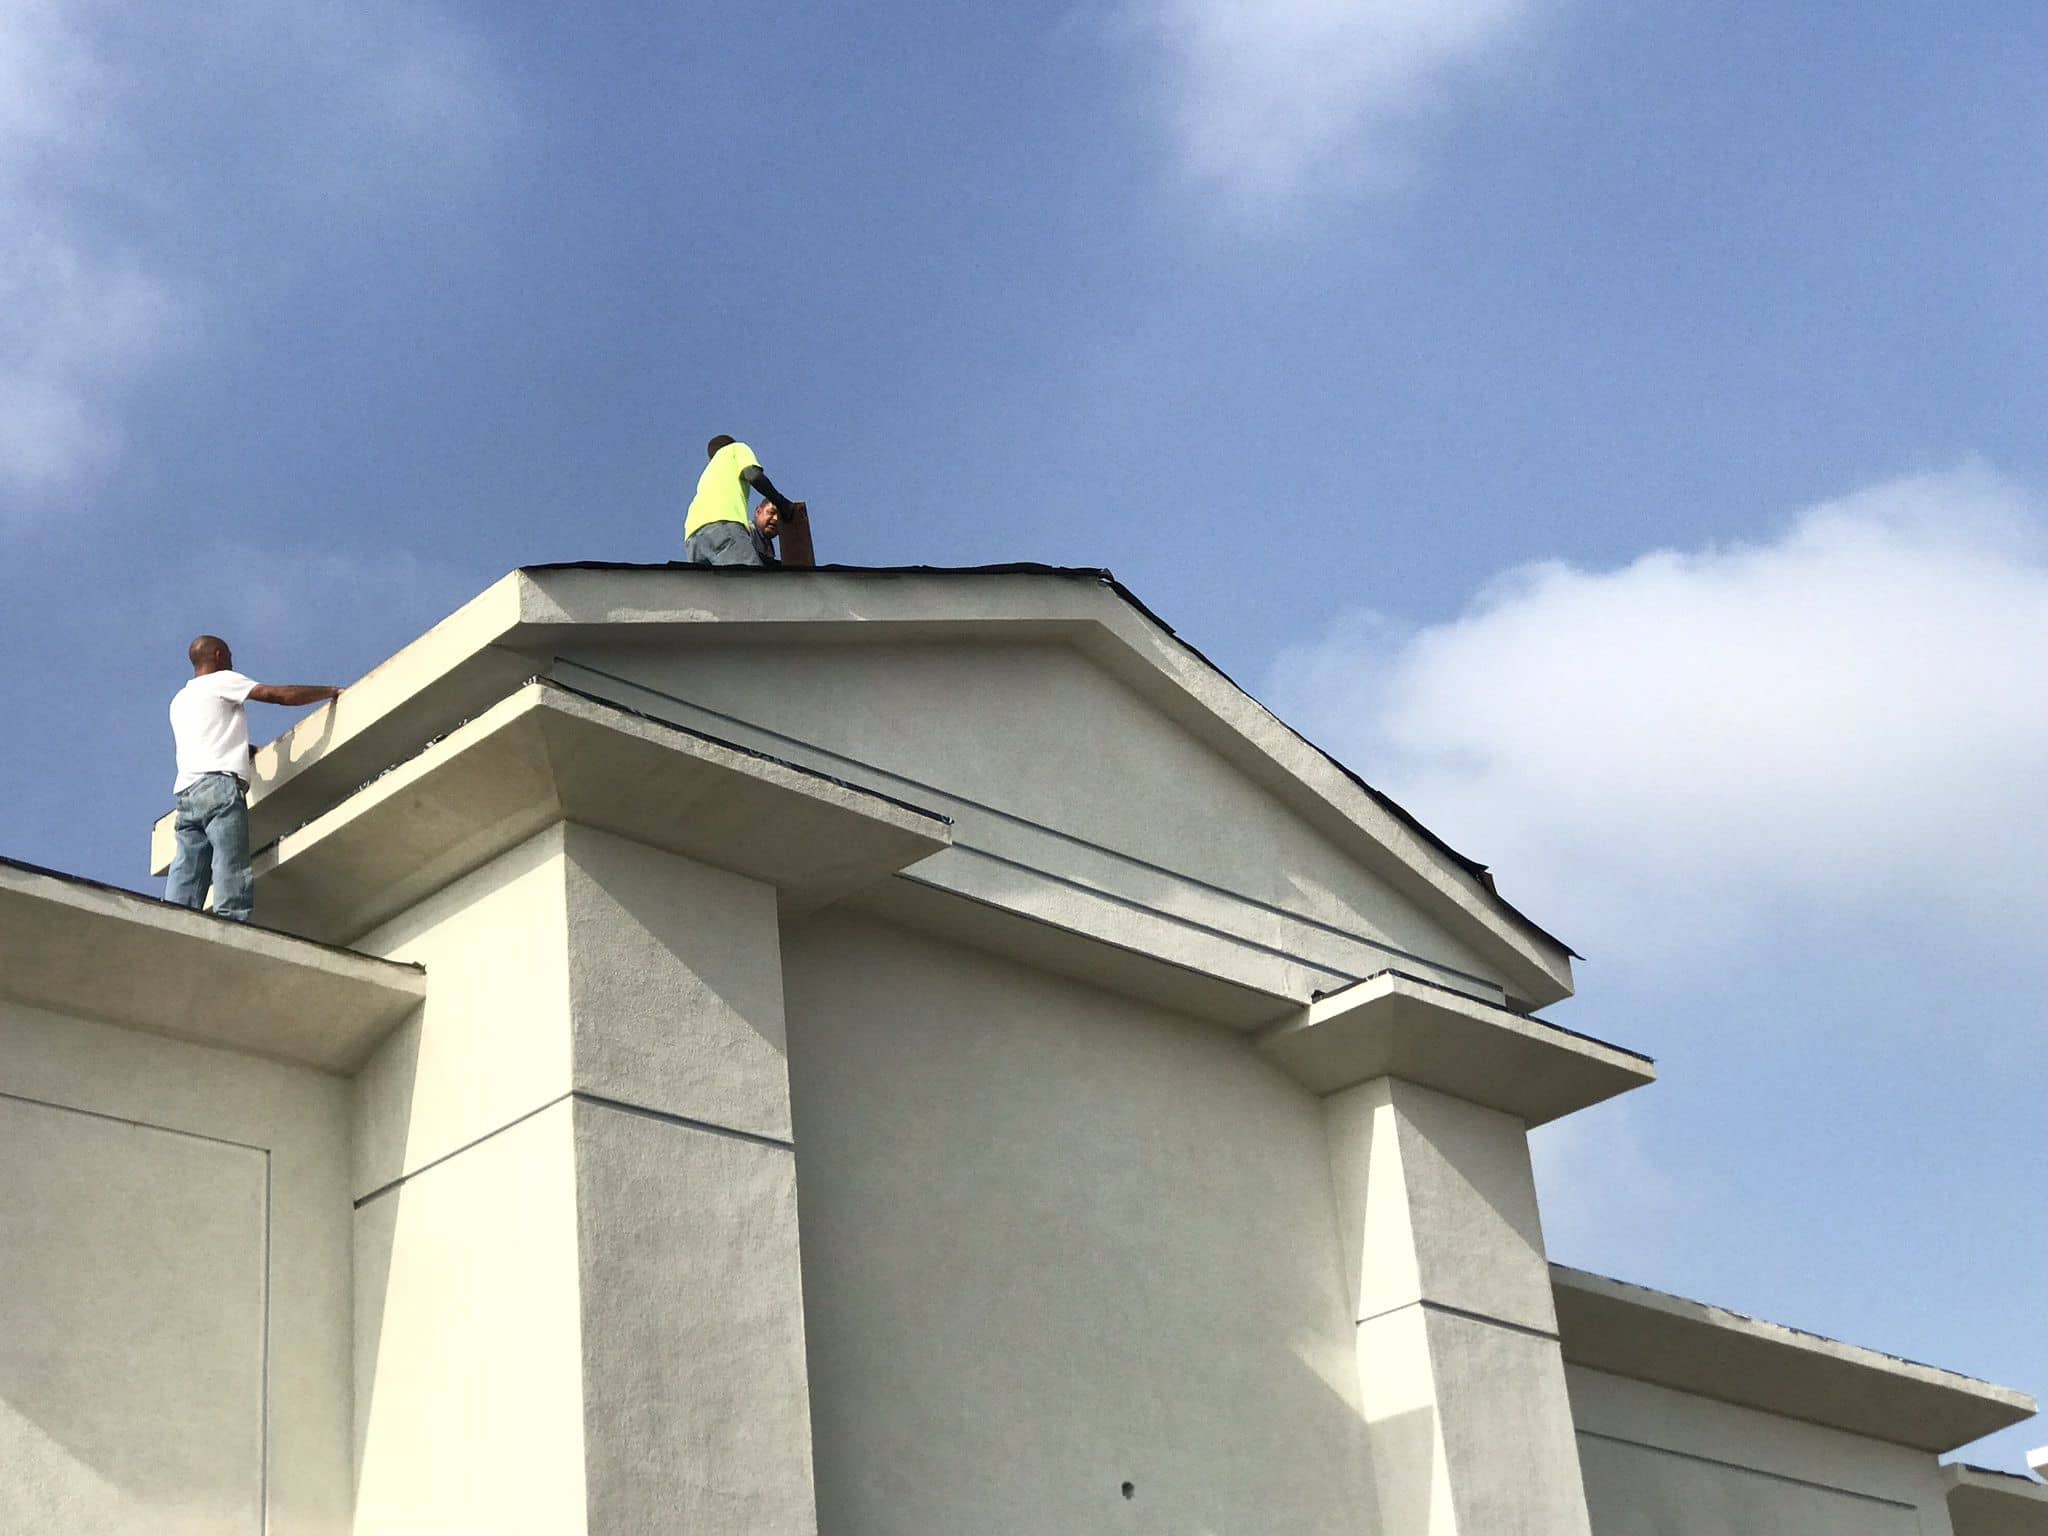 enlarged photo of man on top of a commercial building roof being painted